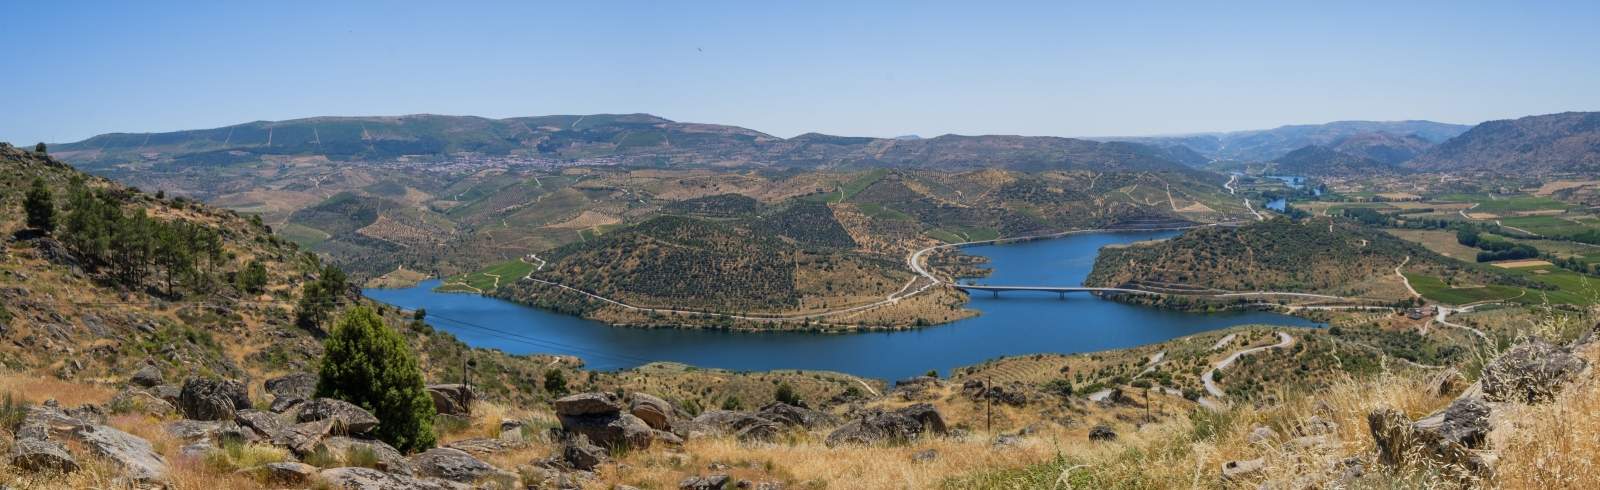 Sale: agricultural property in the region of Douro Superior, Portugal_143857